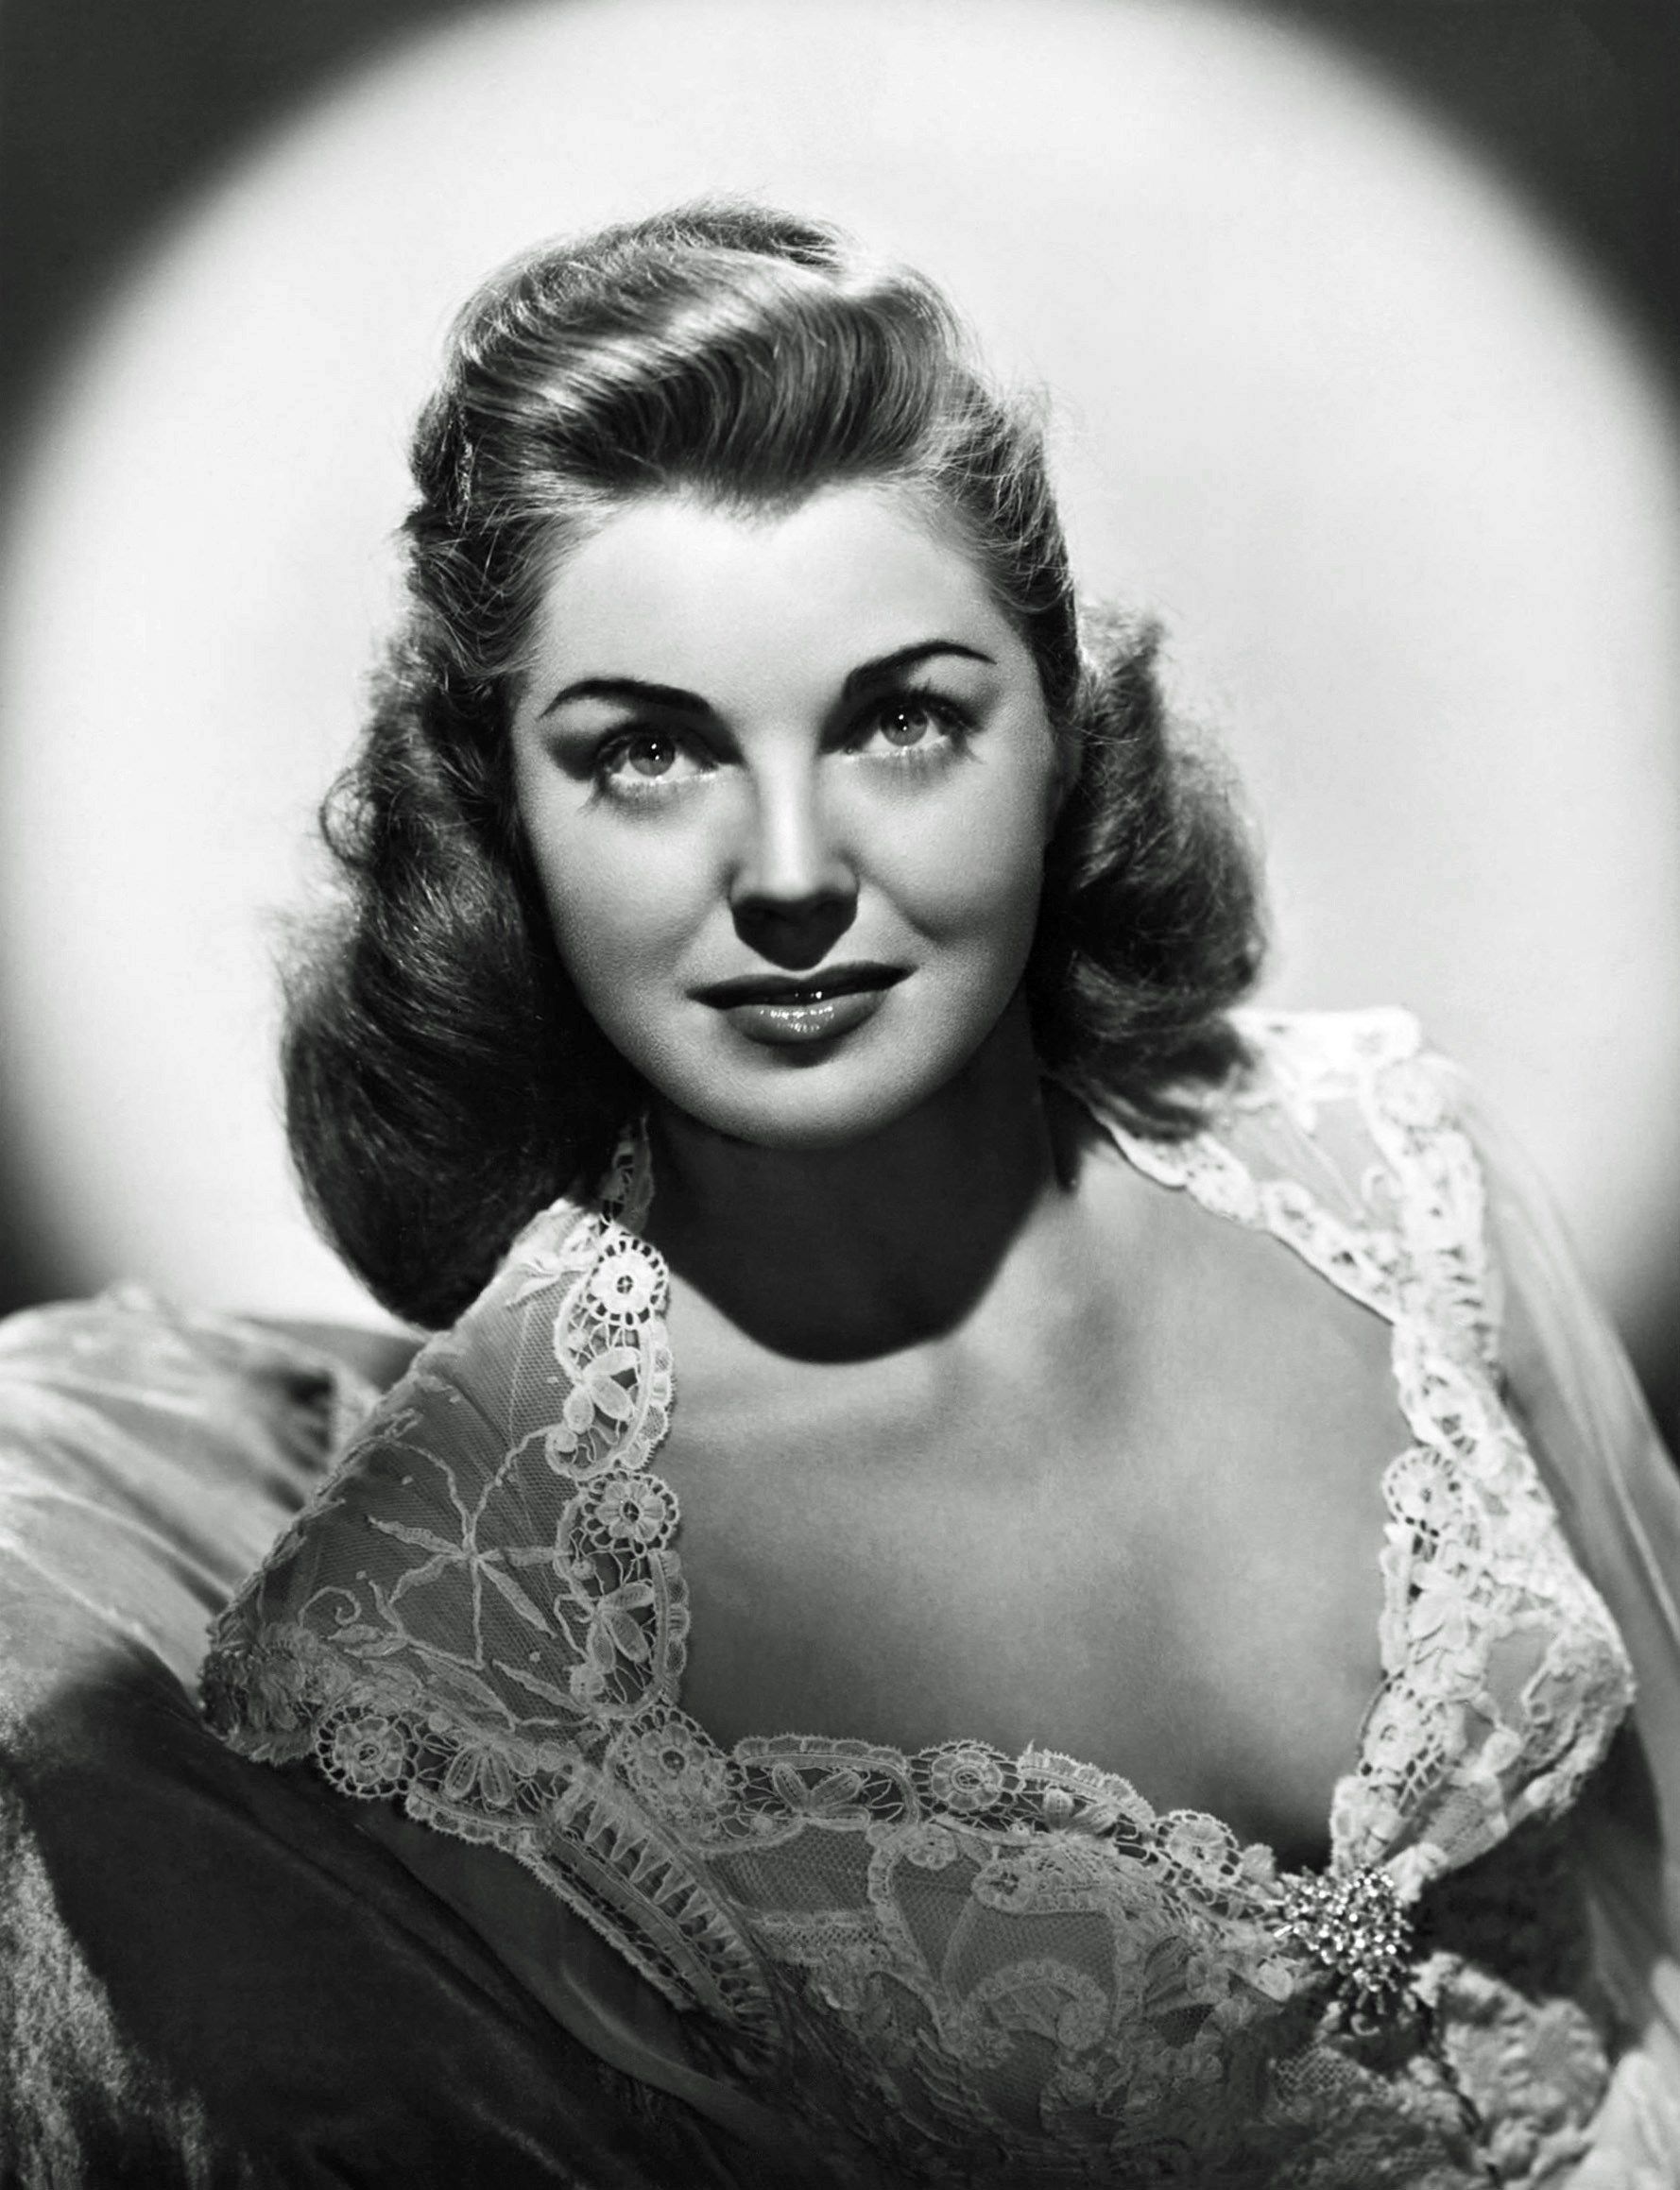 Esther Williams | Old Hollywood - Esther Williams | Pinterest ...